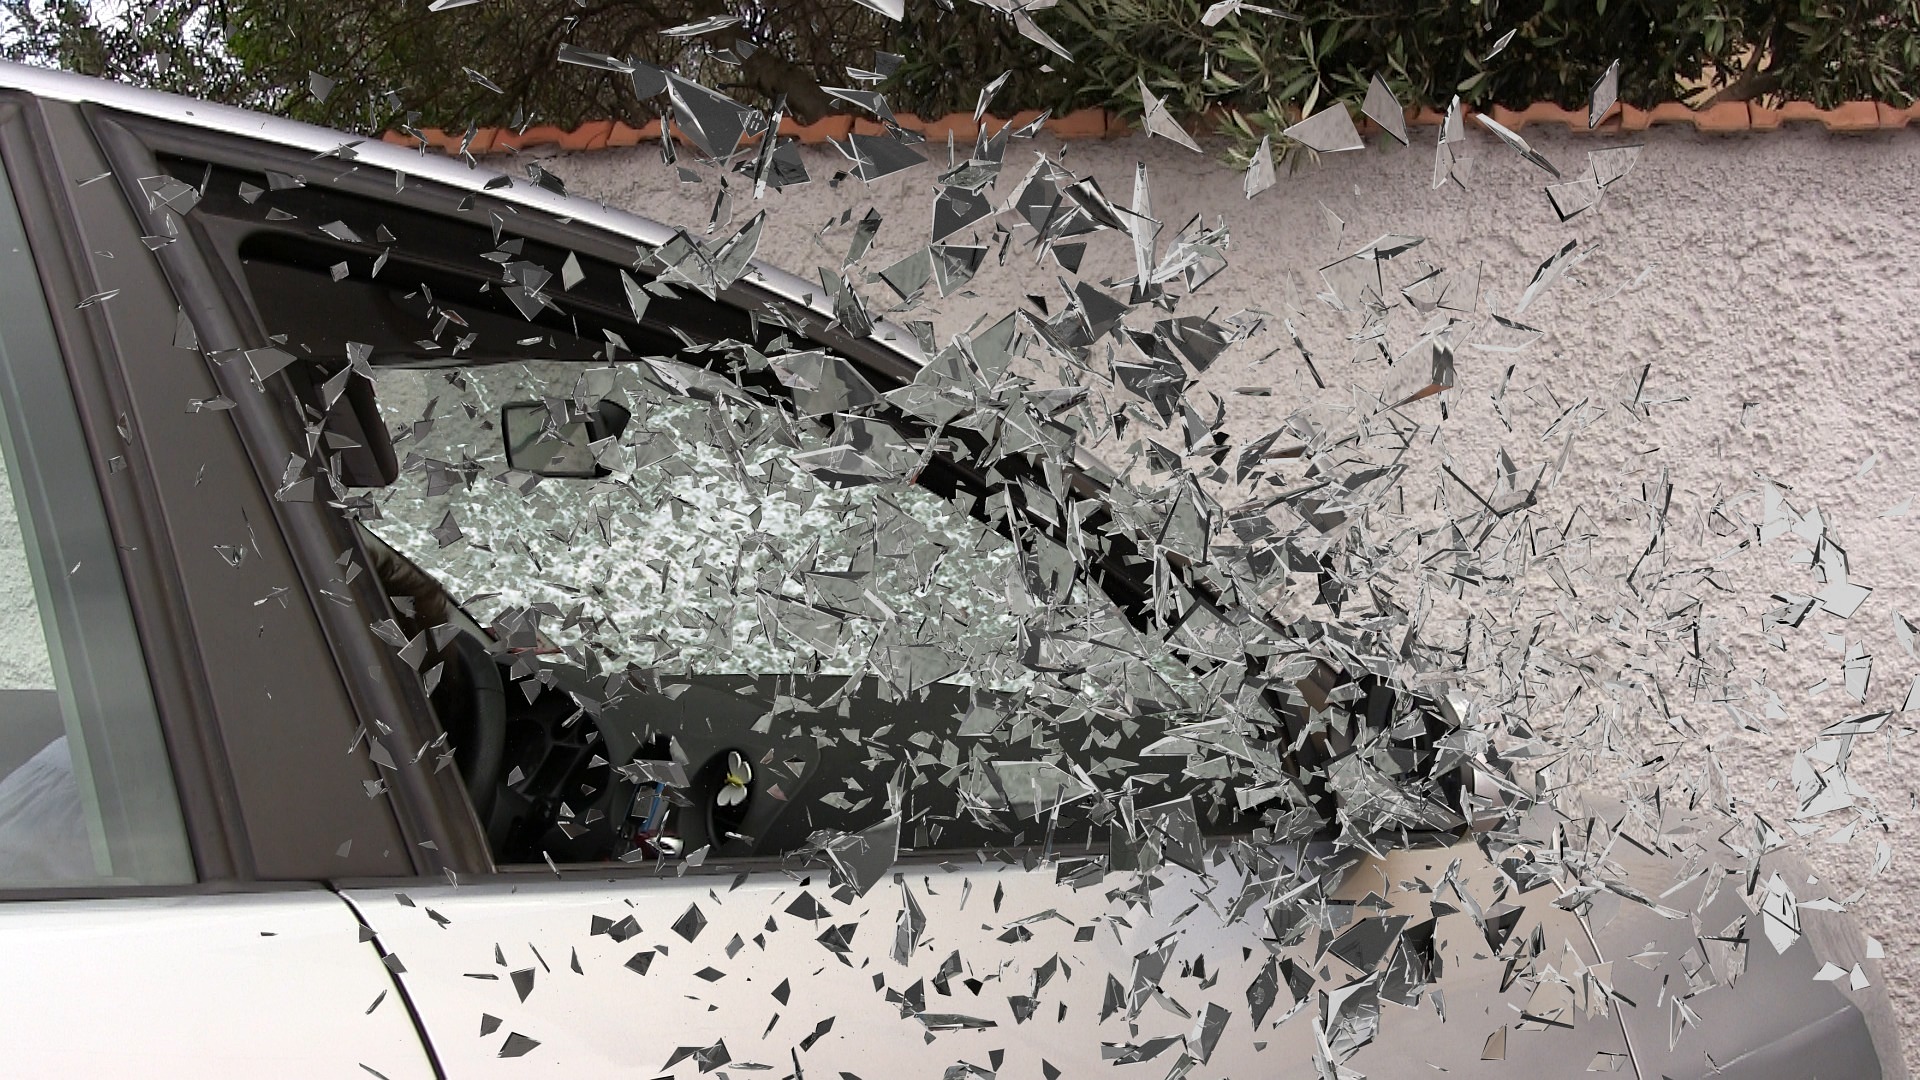 A car window, with glass smashed; our No Win No Fee Solicitors can assist with your injury compensation claim if you have been been involved in a serious Road Traffic Accident.